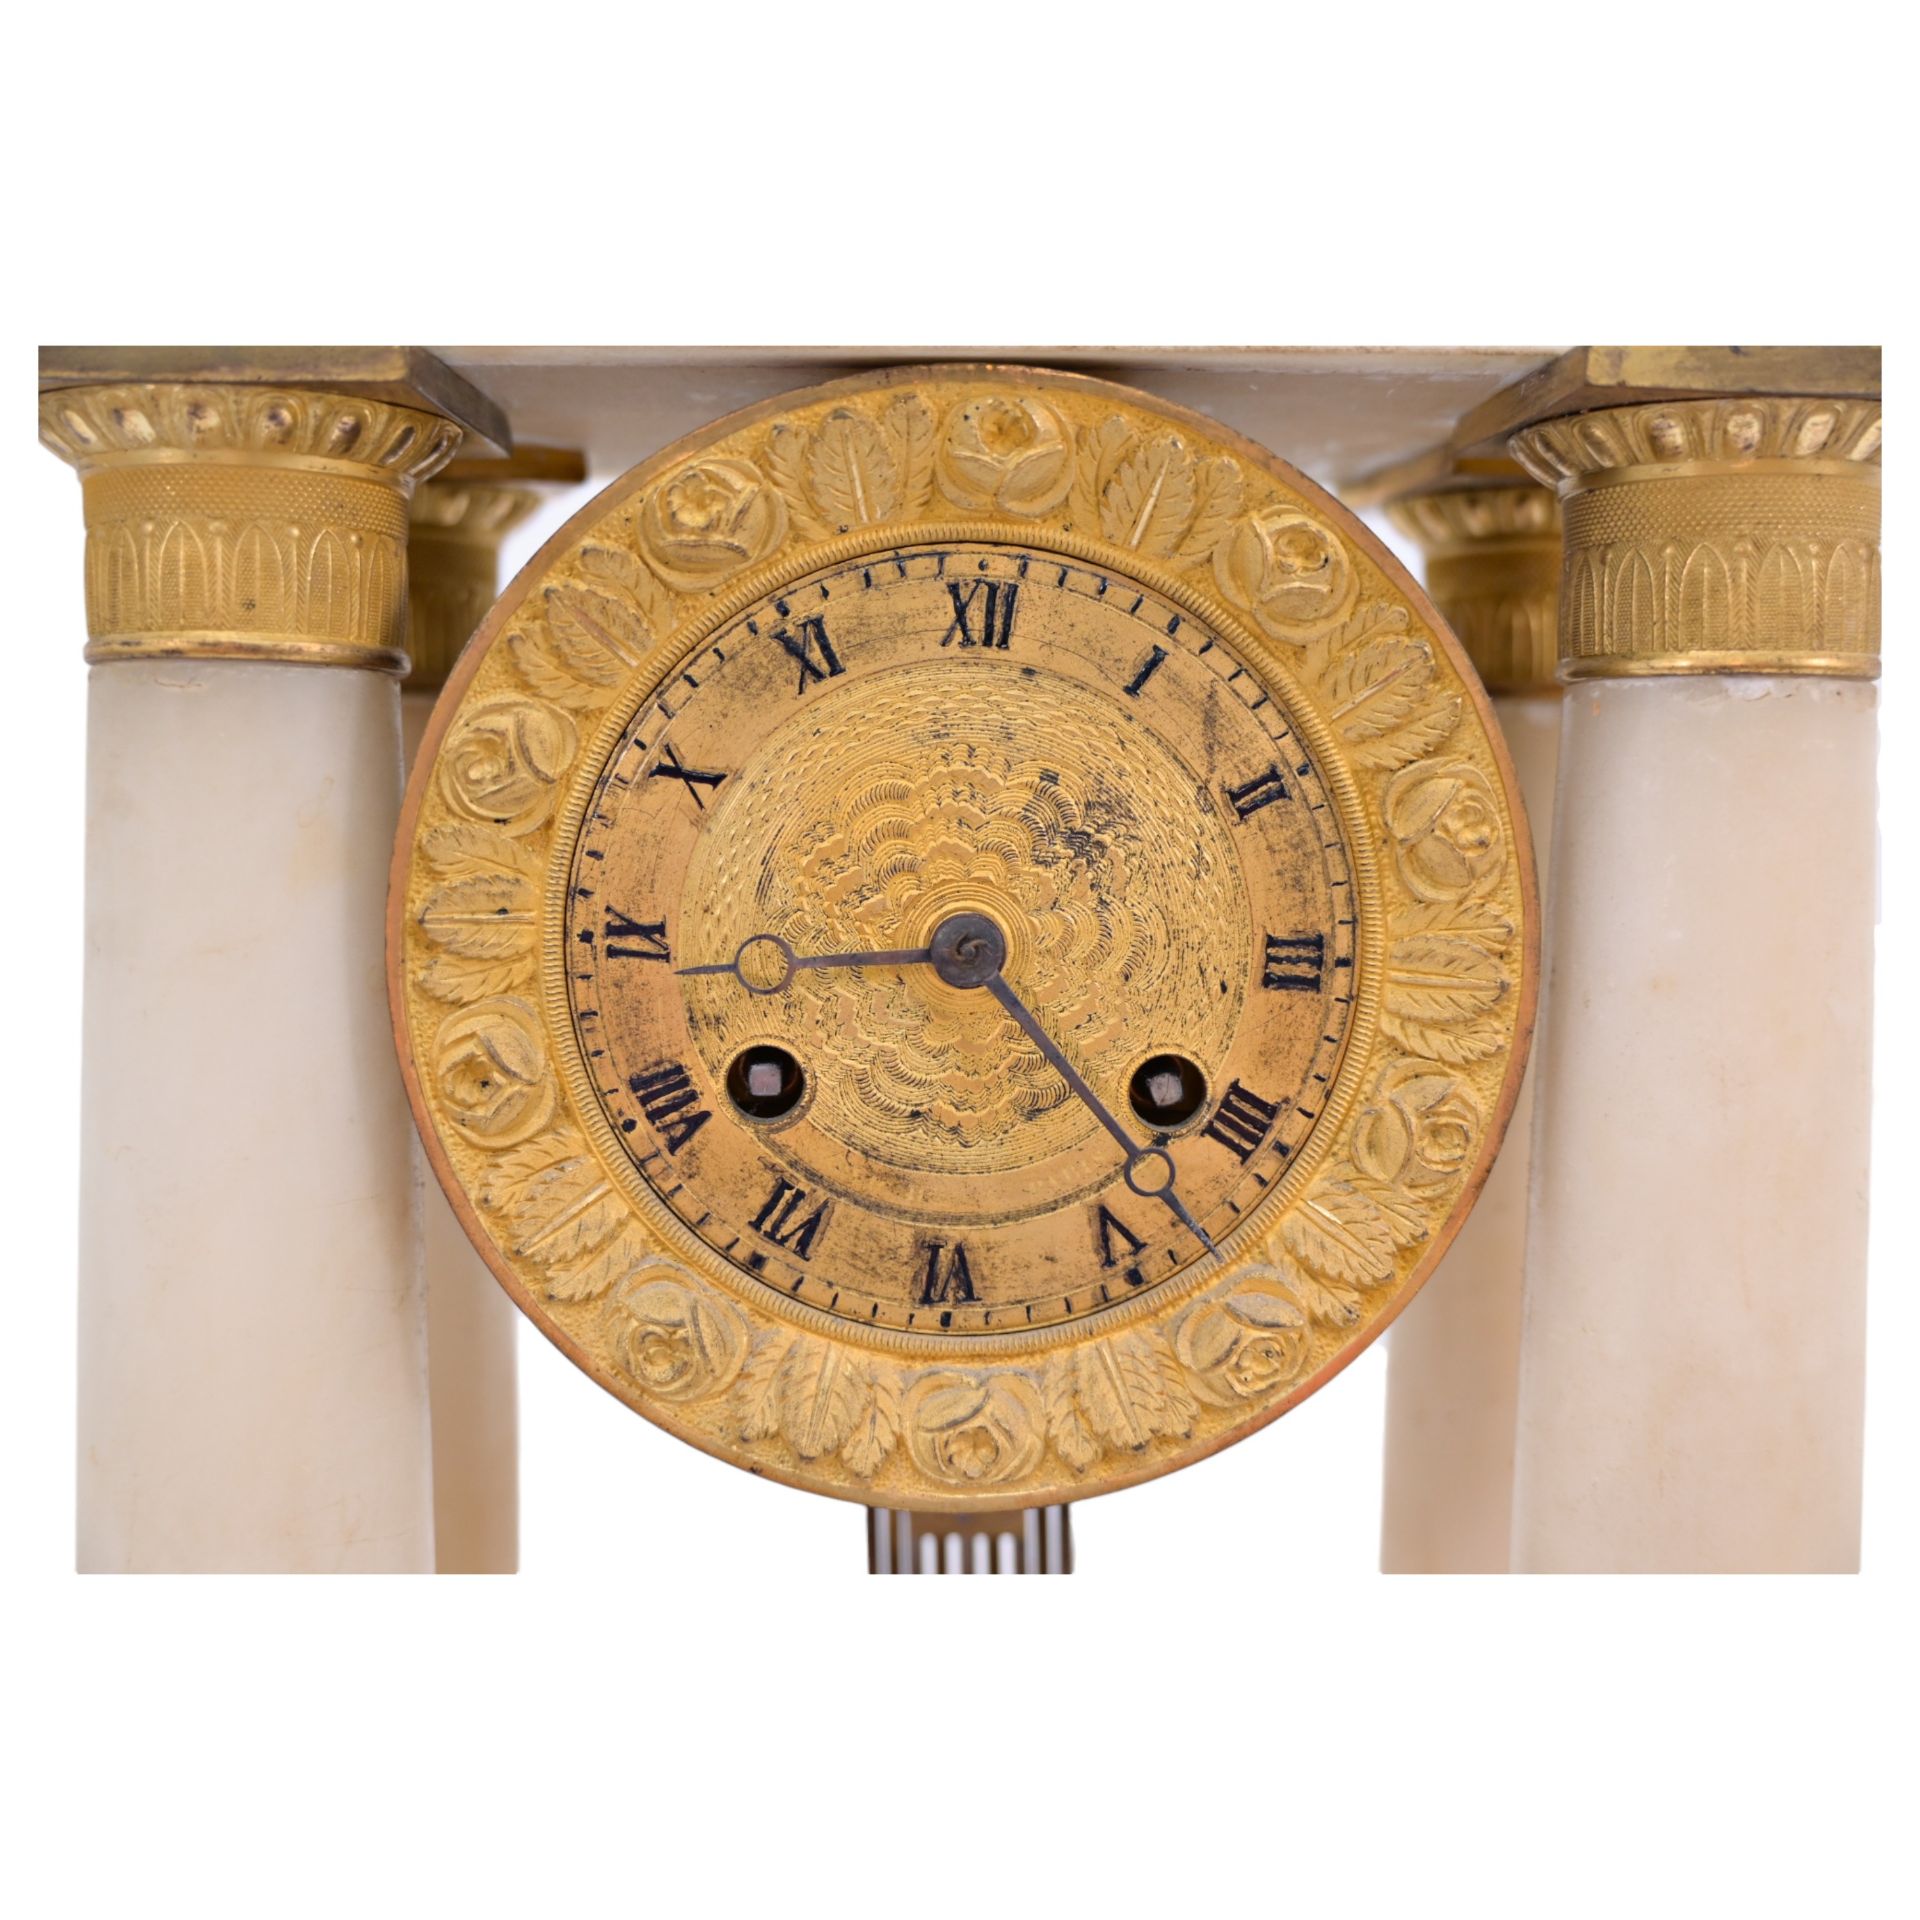 French Empire-Style Alabaster and Gilt-Bronze Portico Clock, mid 19th century. - Image 6 of 10